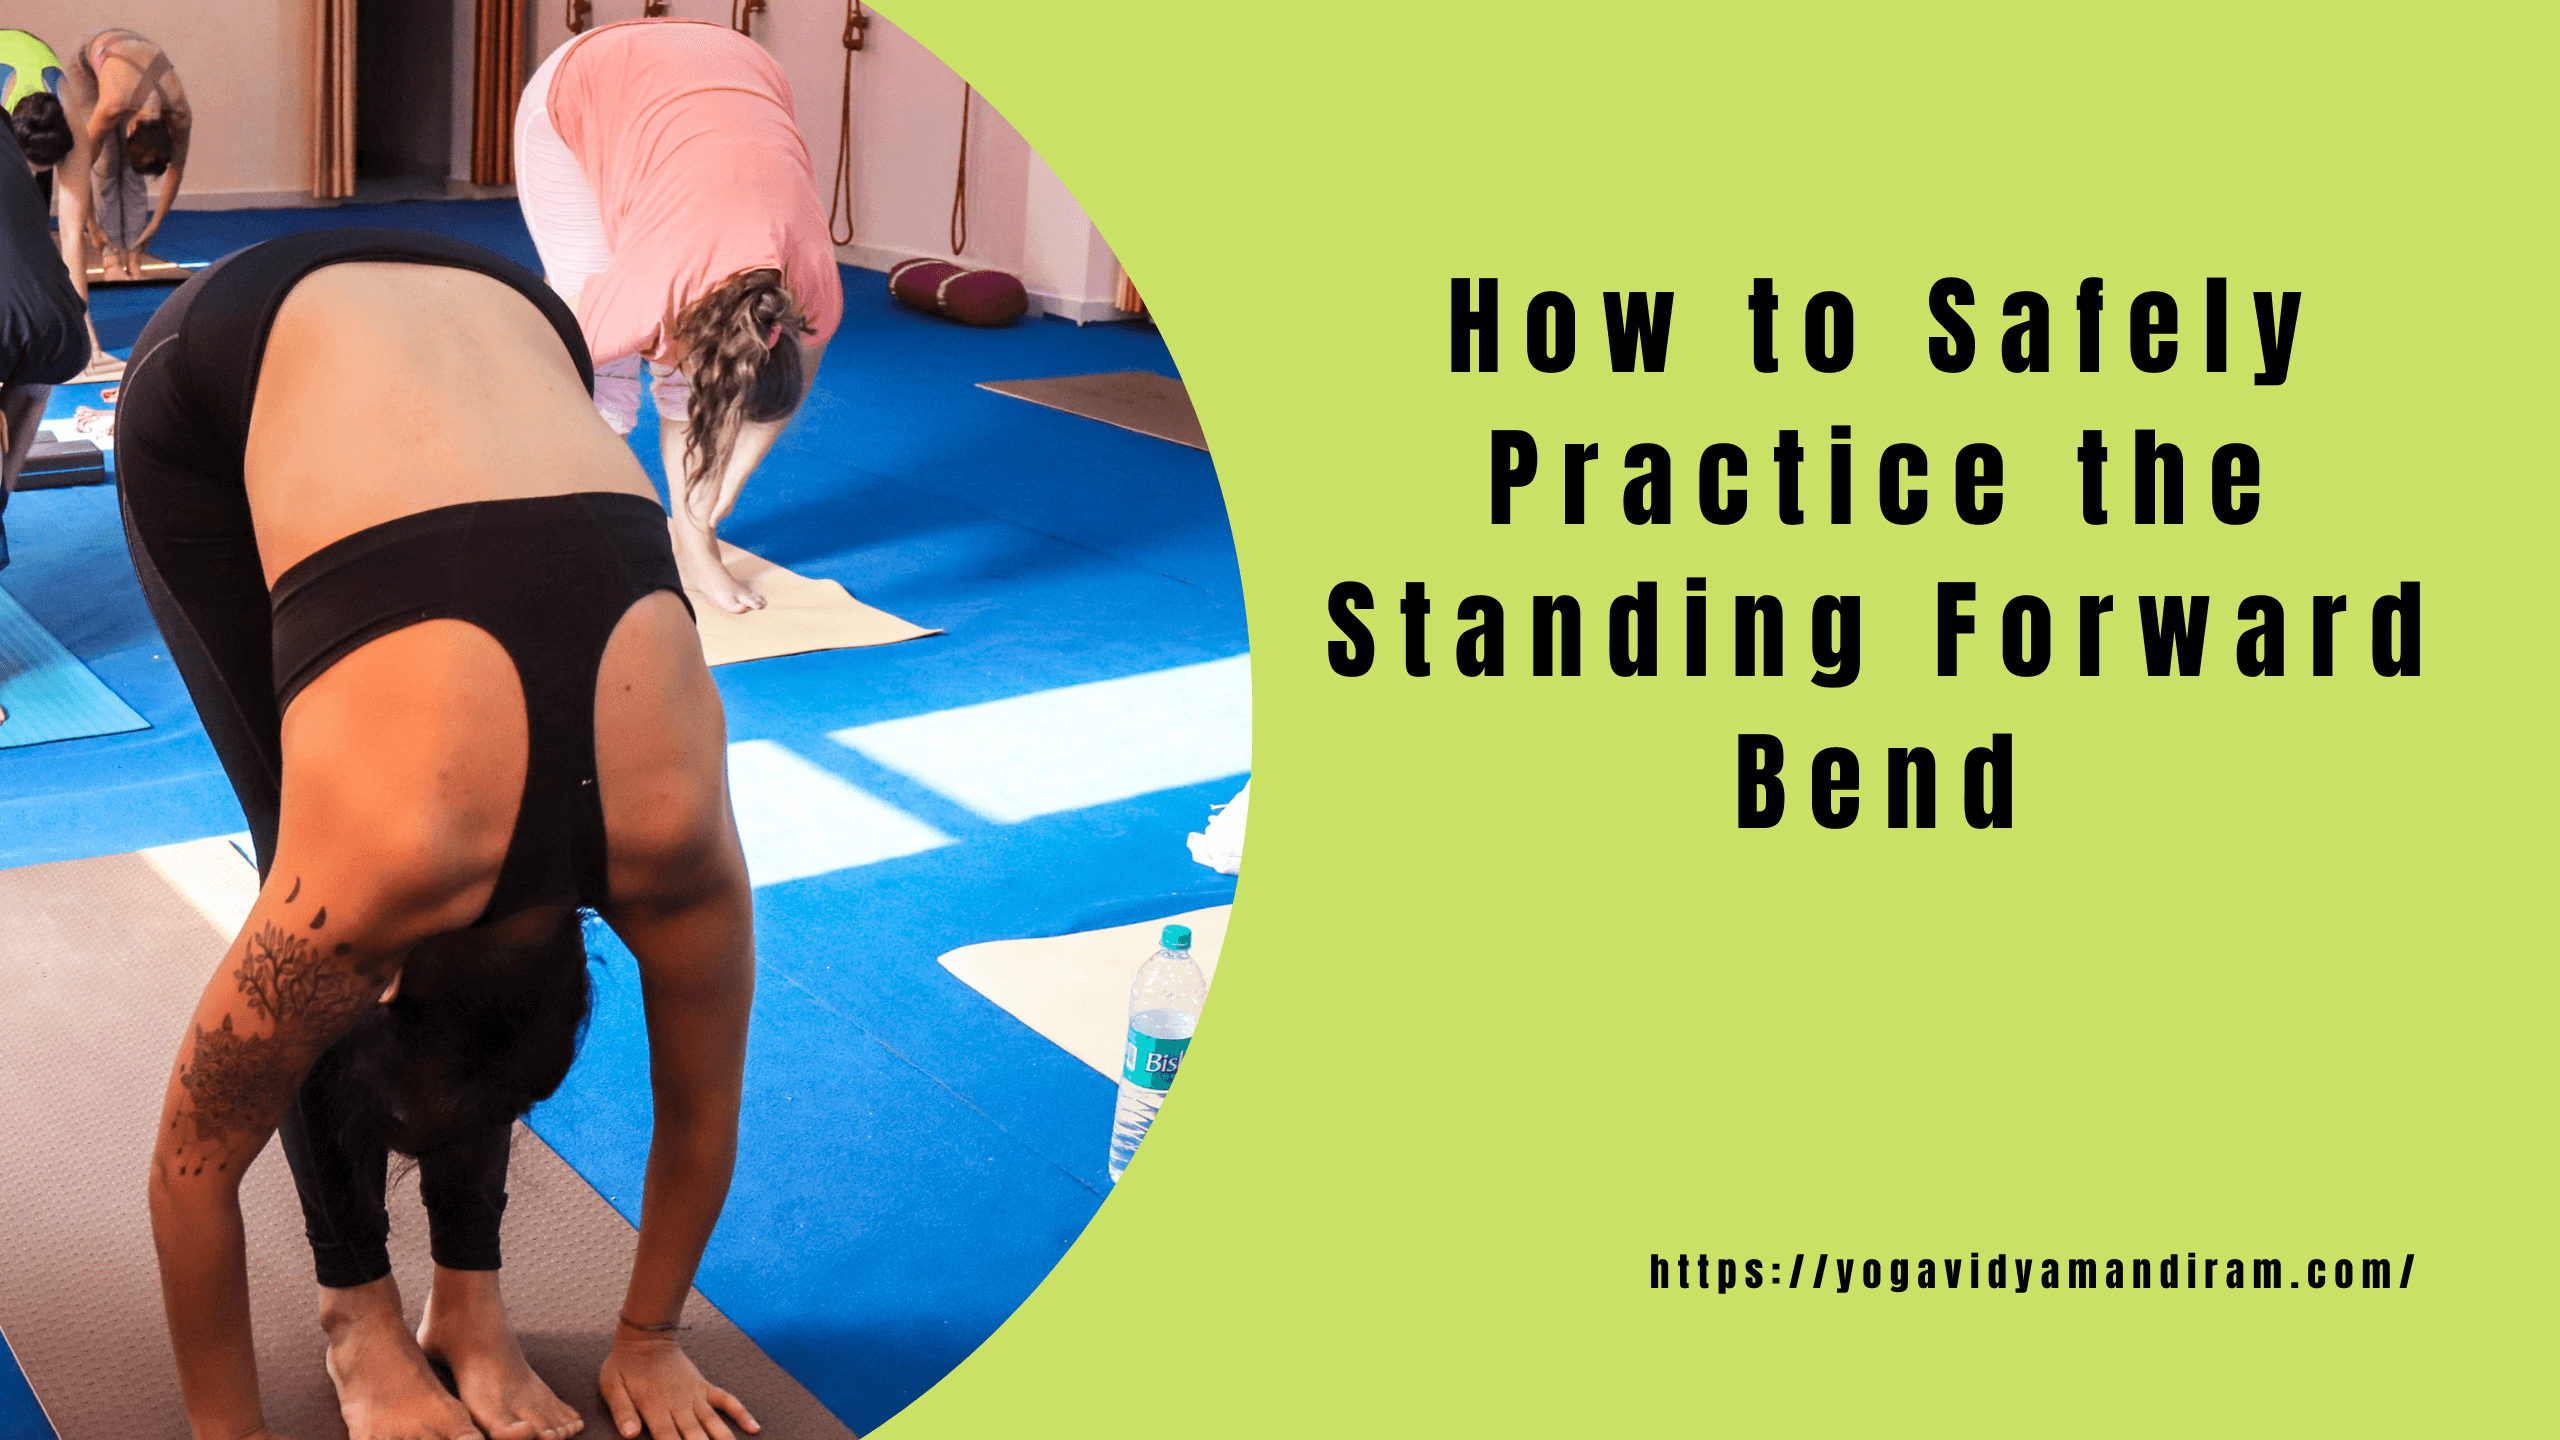 How to Safely Practice the Standing Forward Bend